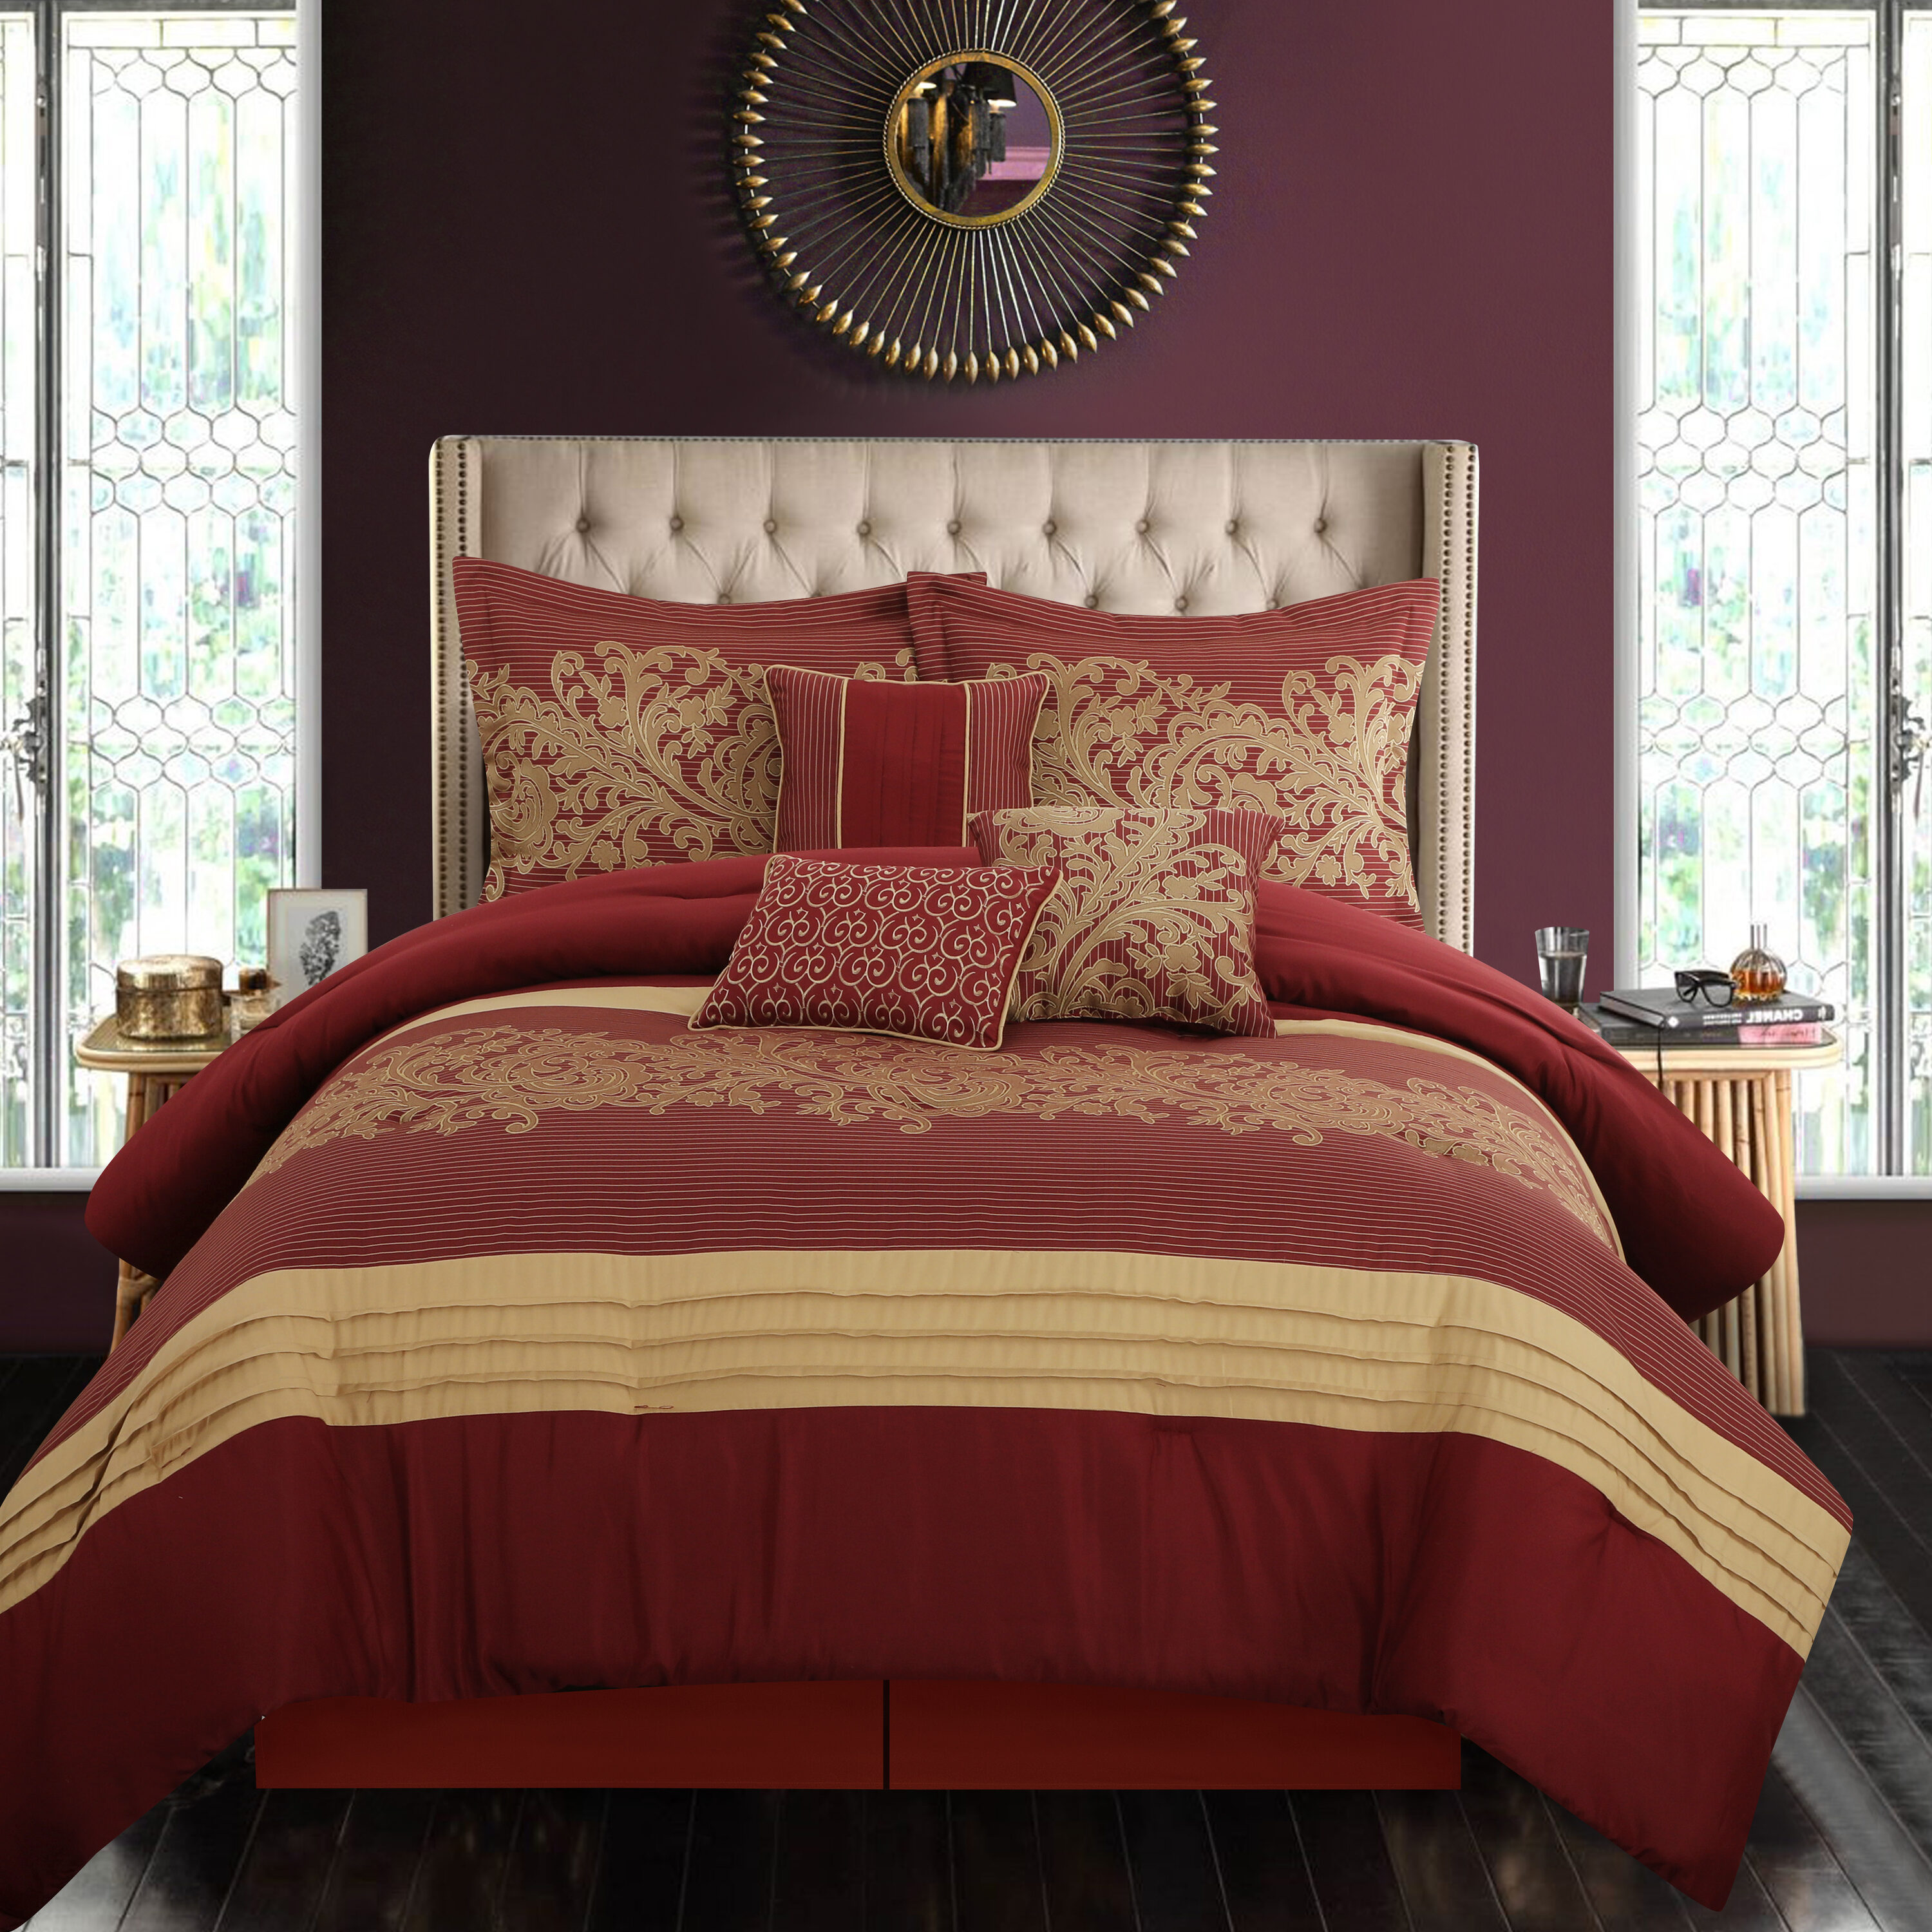 Grand Avenue Sibyl 7-Piece Black/Gold Queen Comforter Set in the Bedding  Sets department at